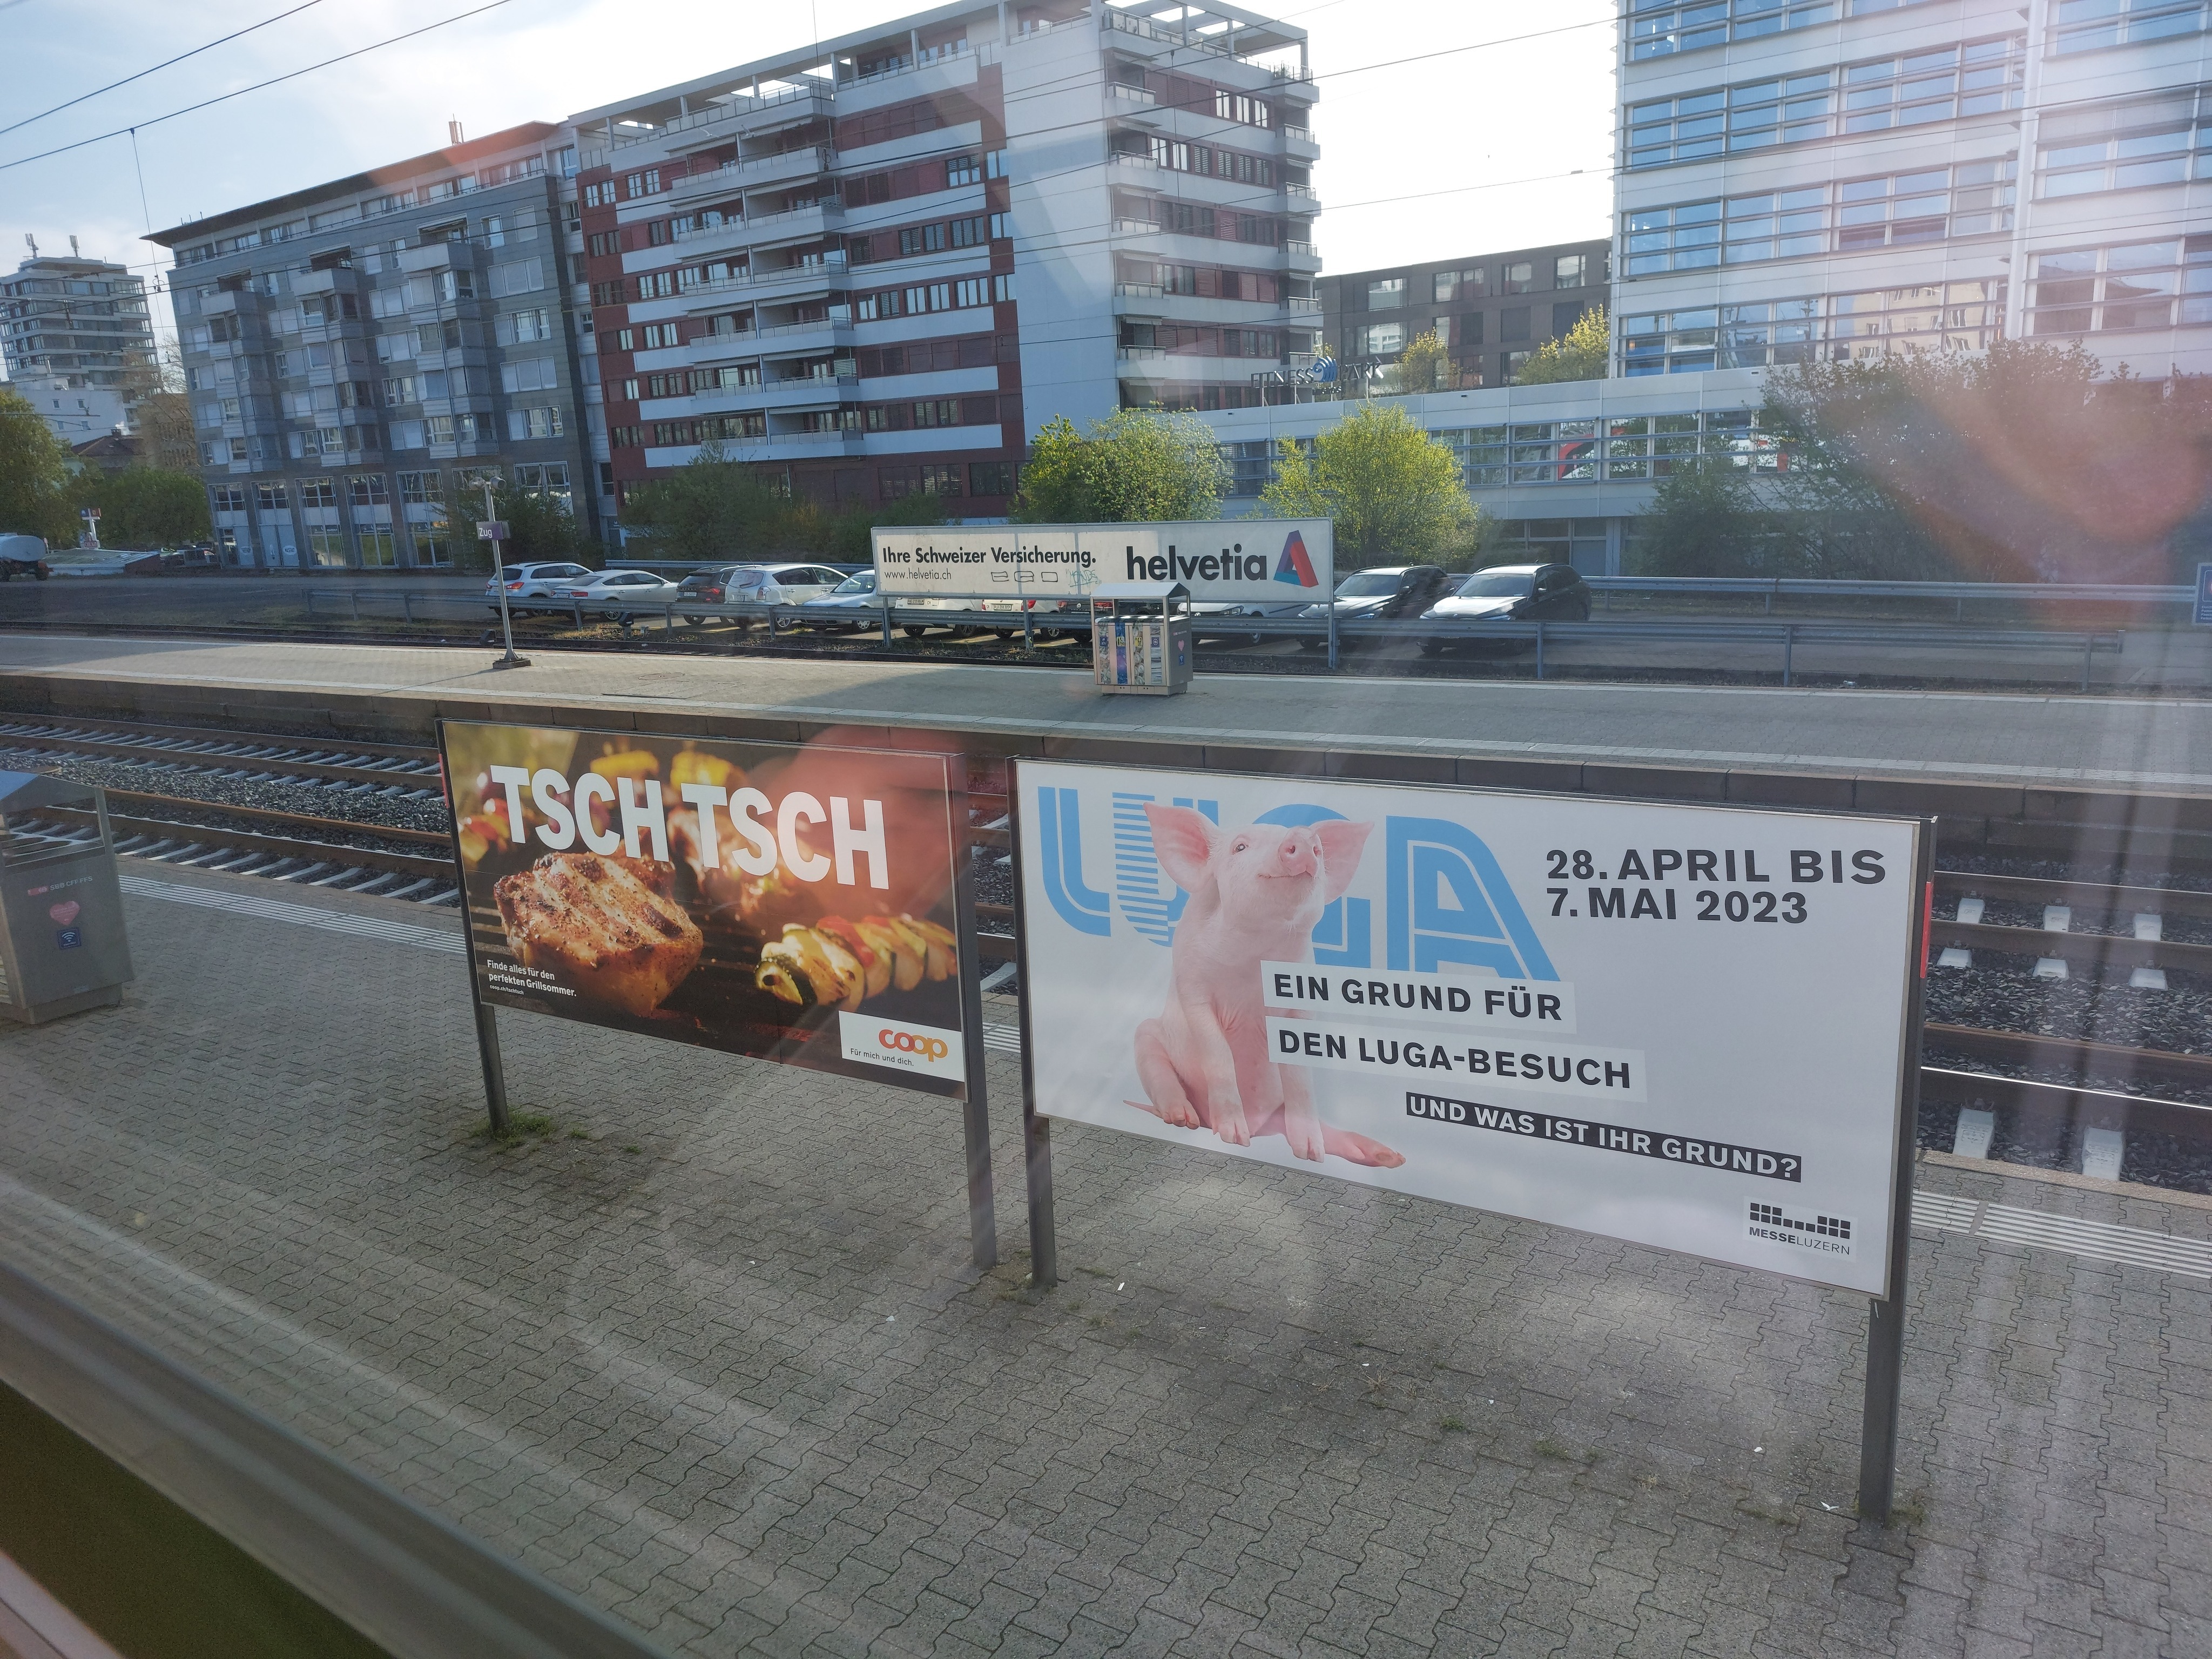 Two ads at the train station, one advertising a market with a cute piglet, the other showing two cuts of pork on a bbq with hissing noises